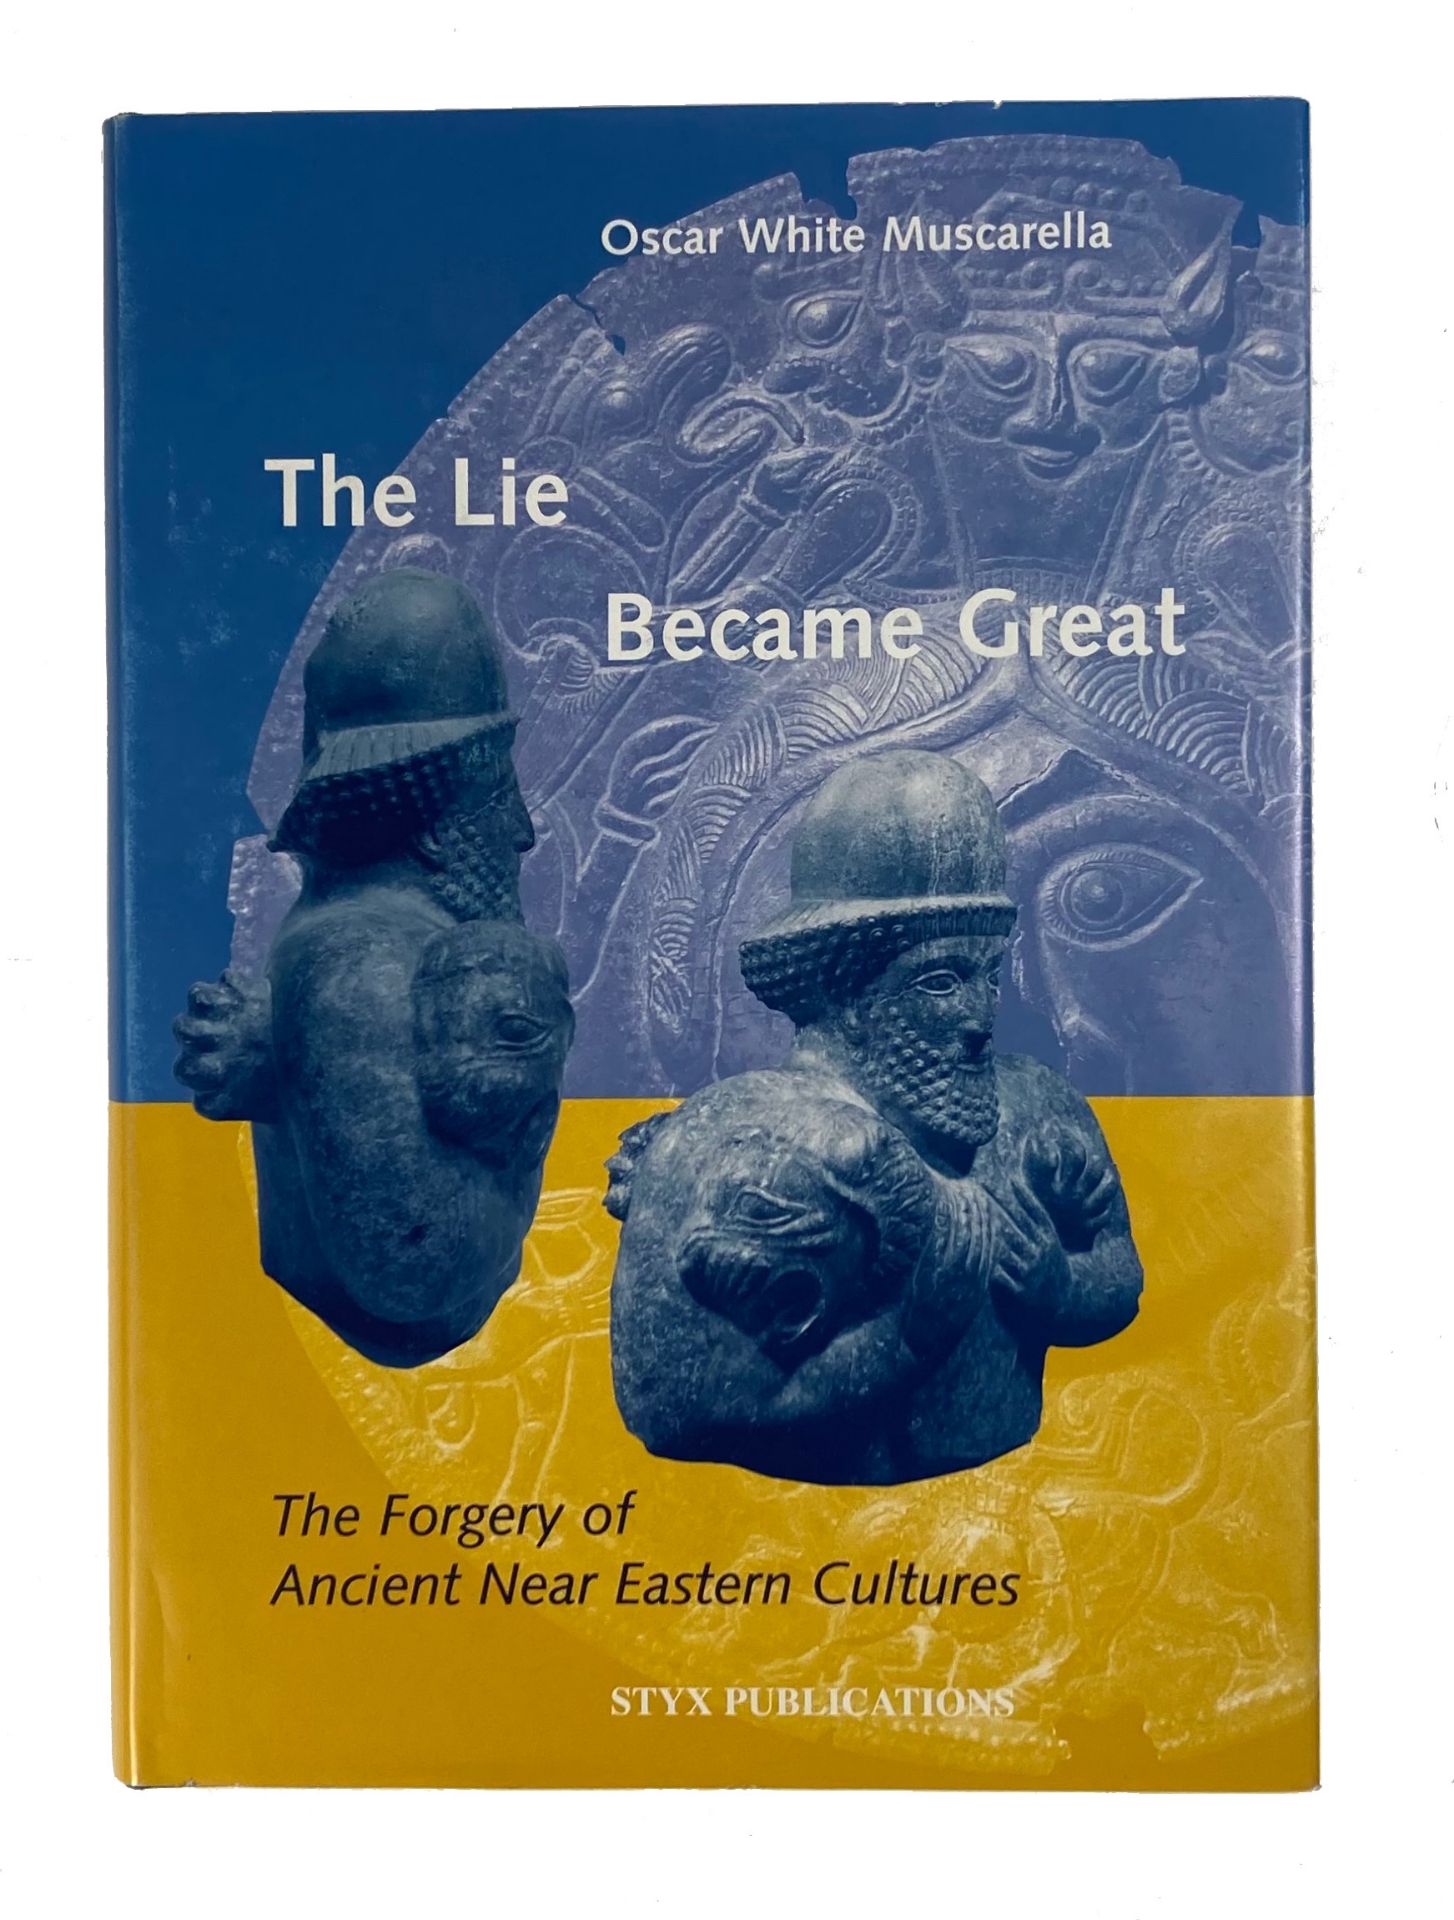 MUSCARELLA, O.W. The Lie Became Great. The Forgery of Ancient Near Eastern